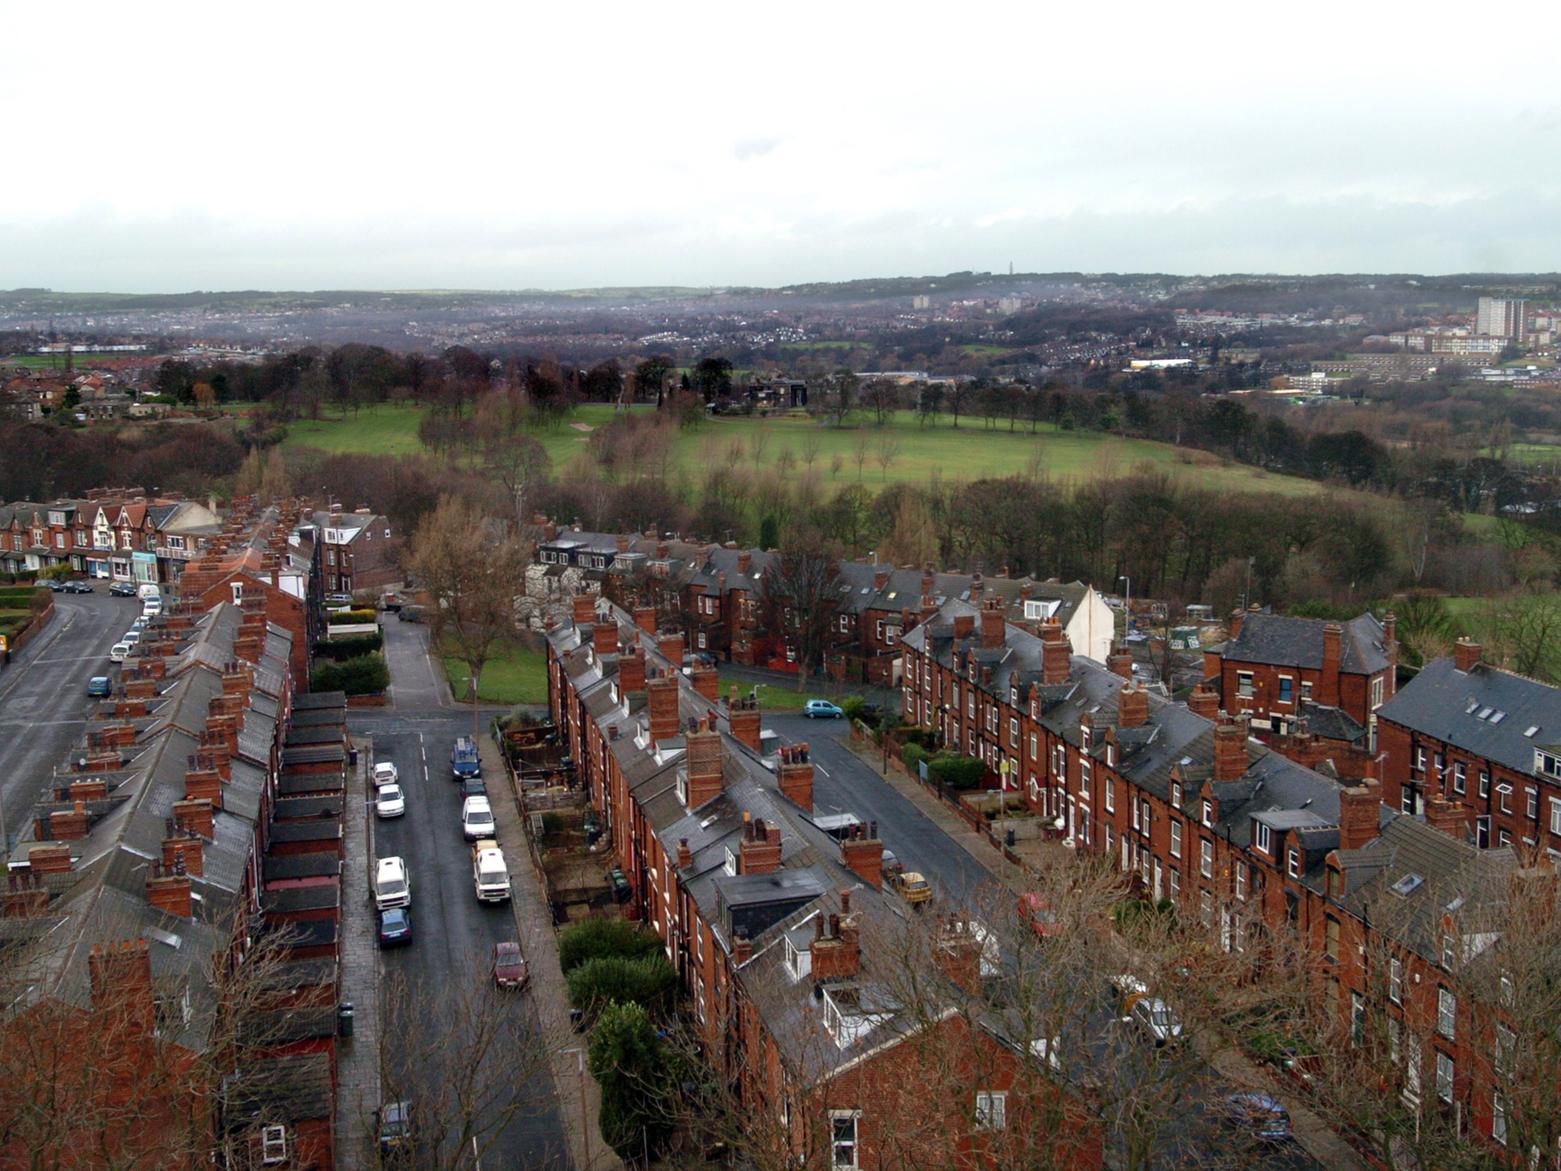 The streets of Armley and Gotts Park viewed from the top of the tower of Christ Church.